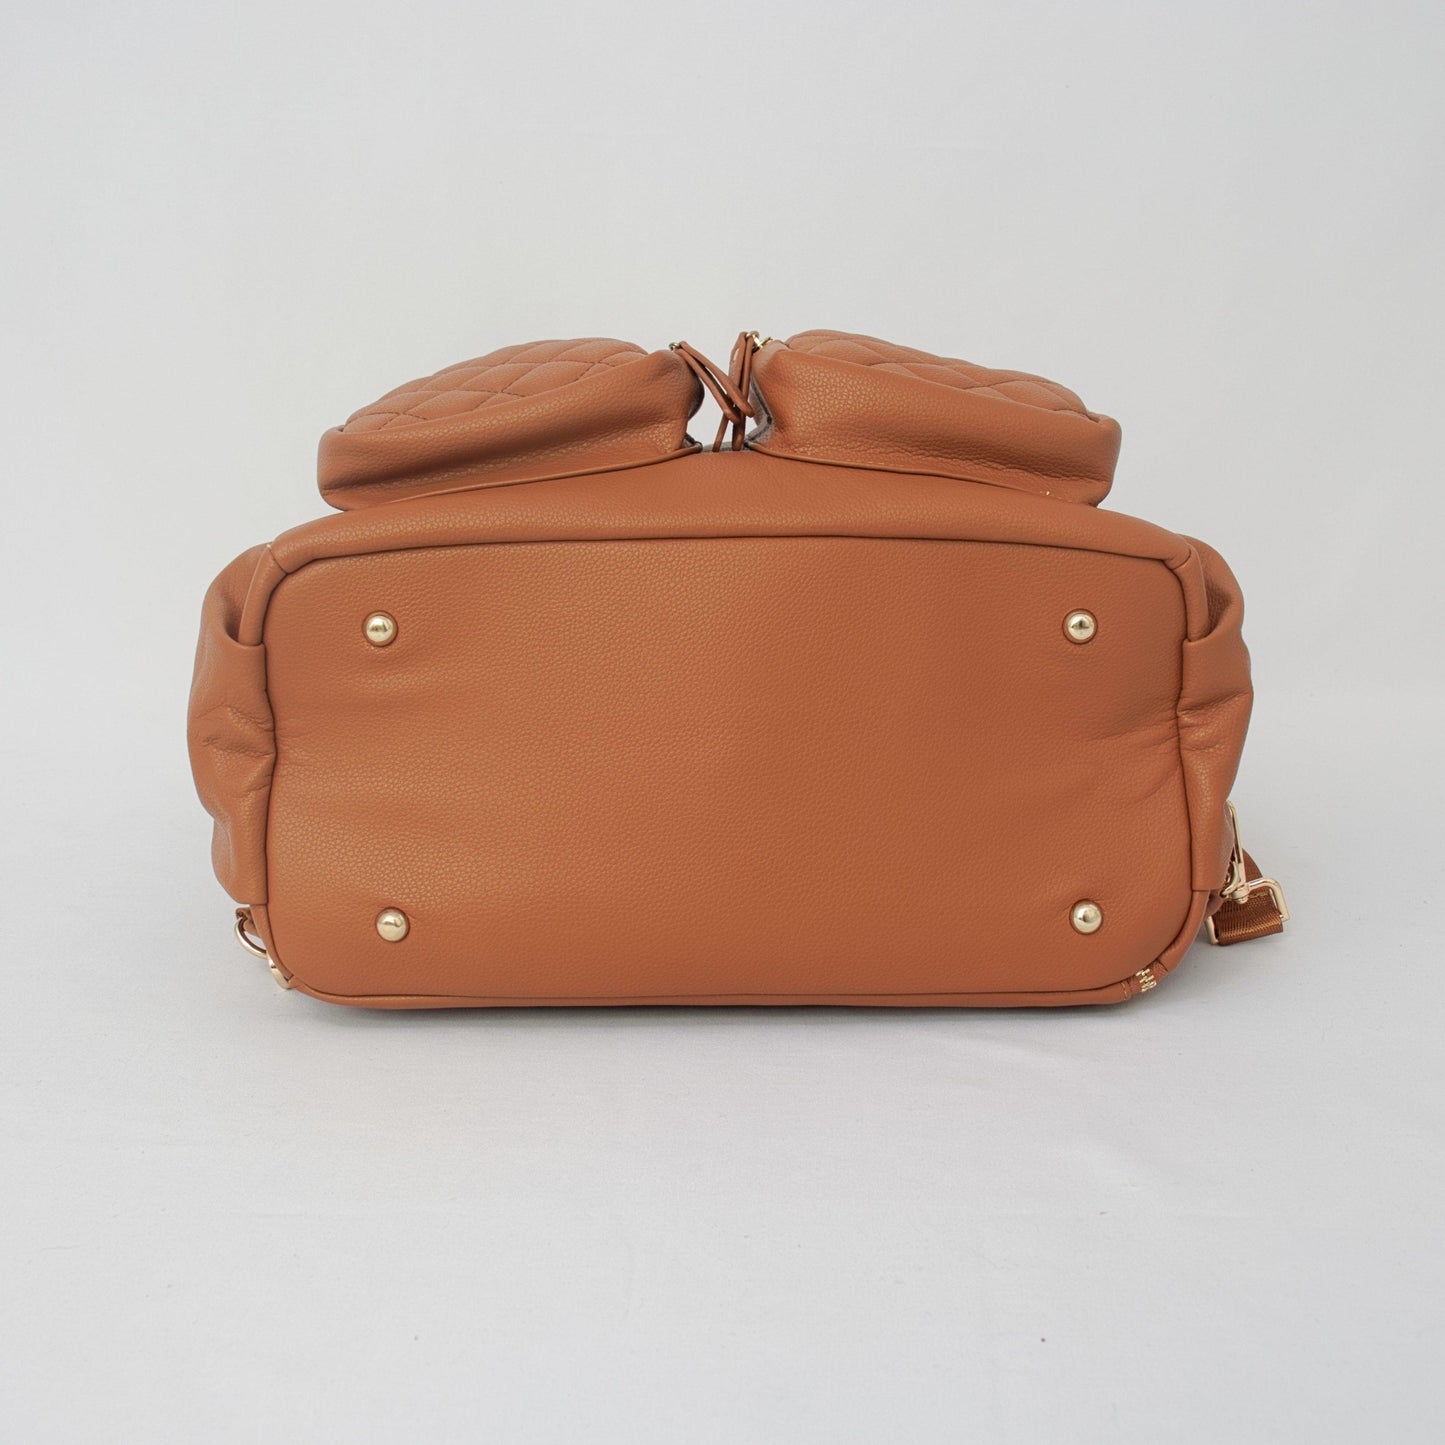 L&M Boutique Changing Bag has protective fit at the bottom so you can place it on any surface